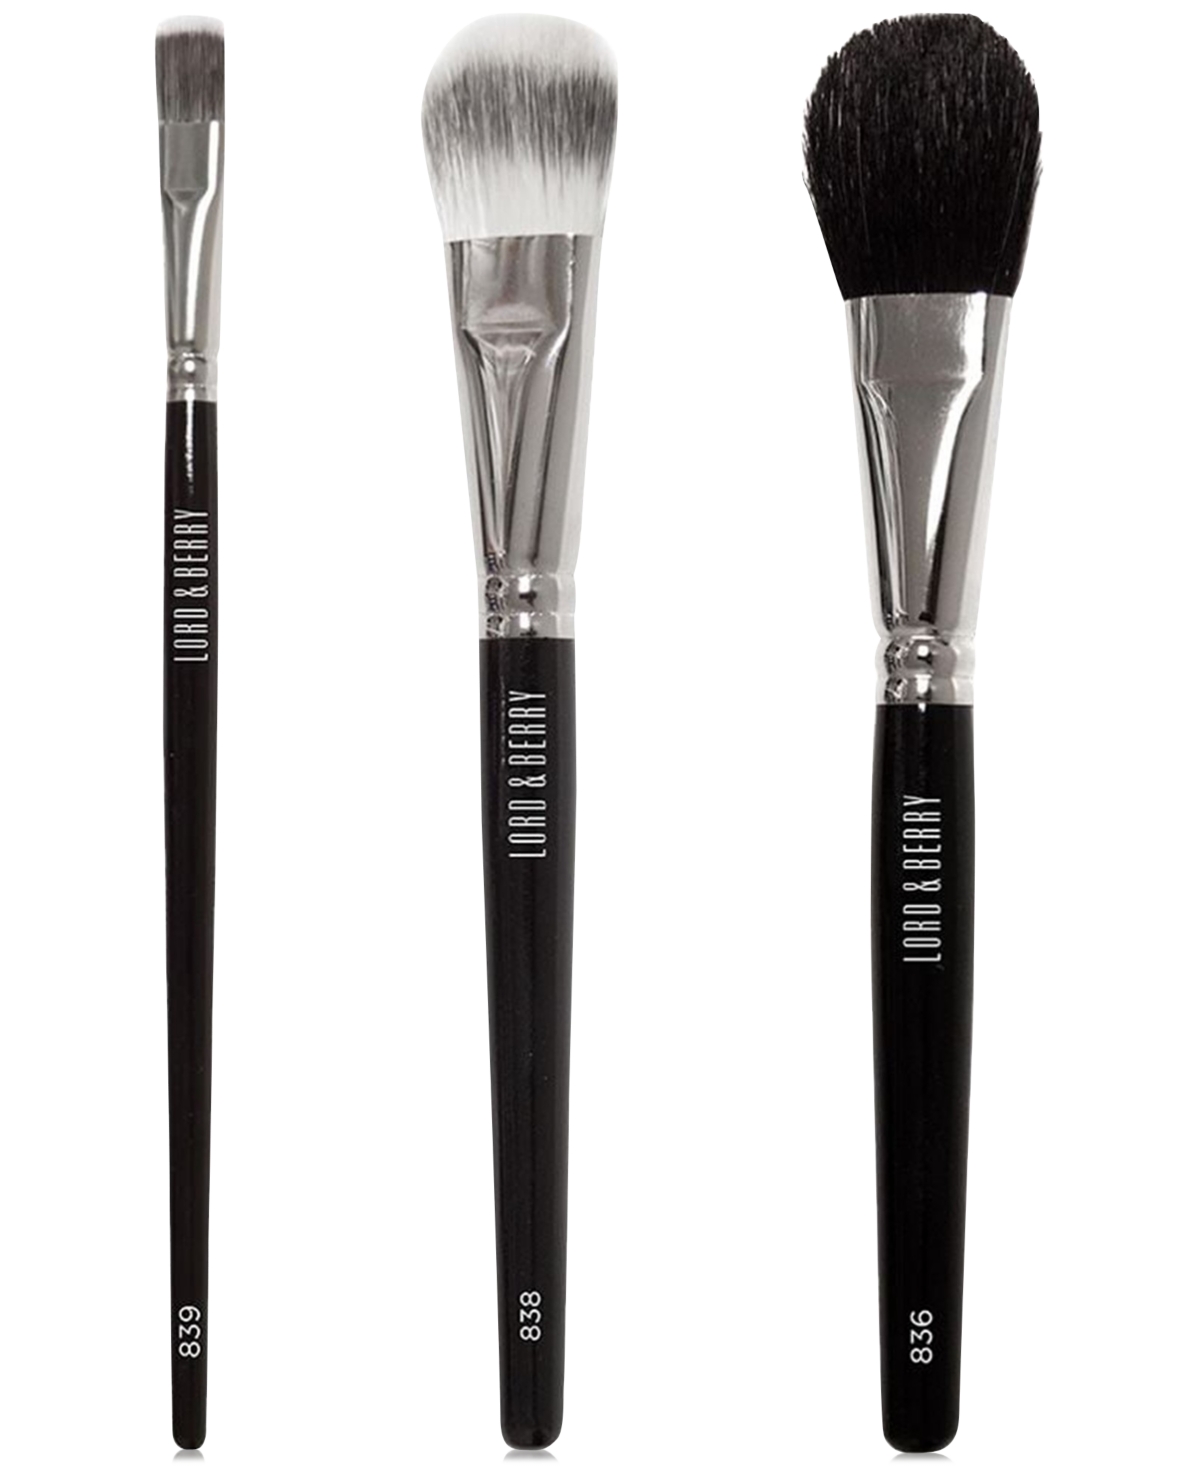 Lord & Berry 3-piece Face Brush Set In Multi